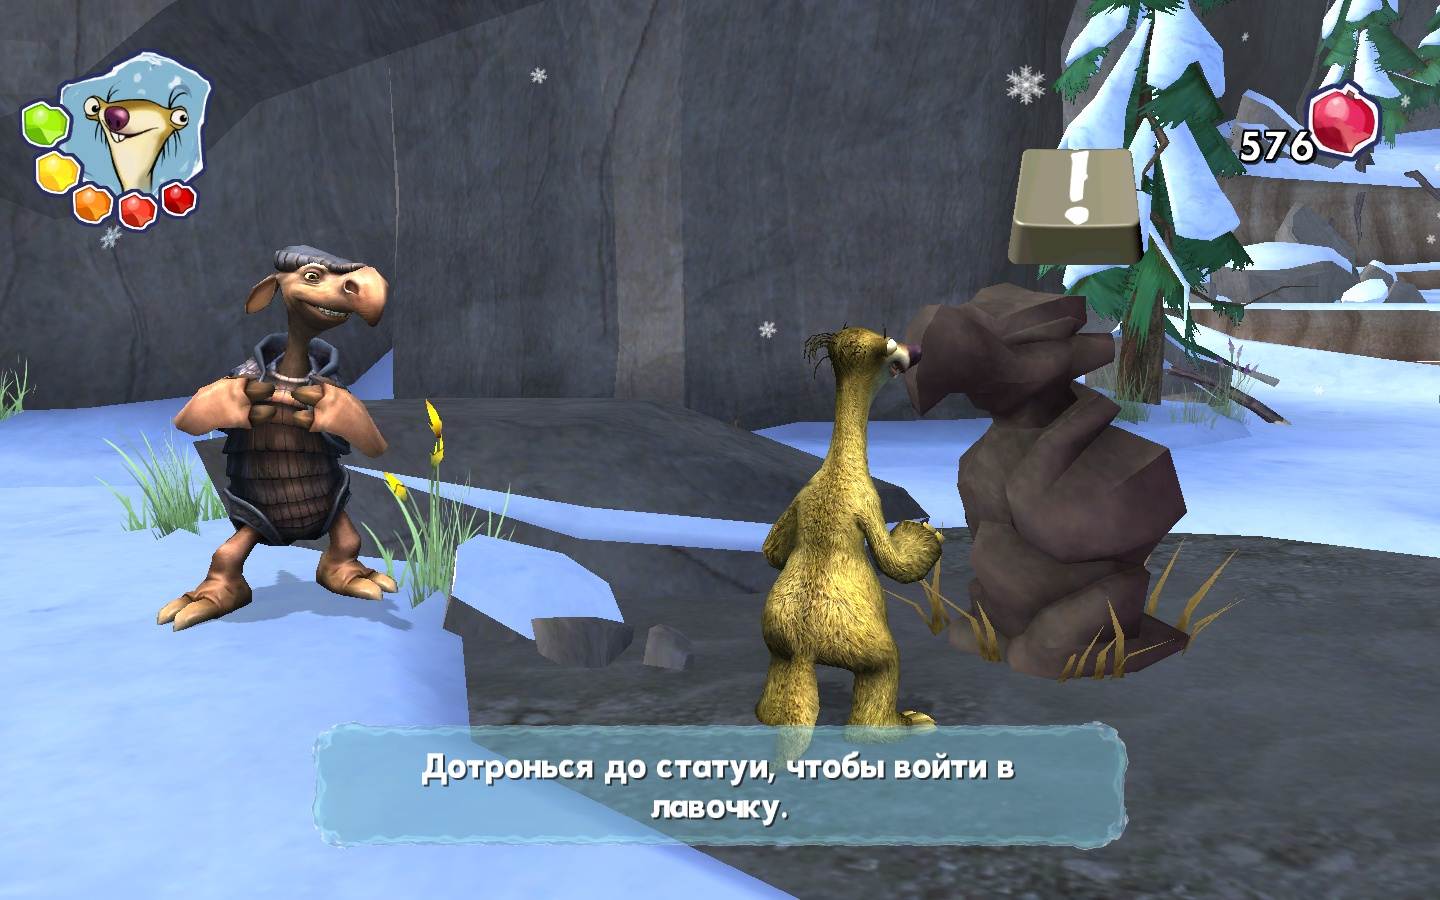 ice age 3 dawn of dinosaurs subtitles torrent